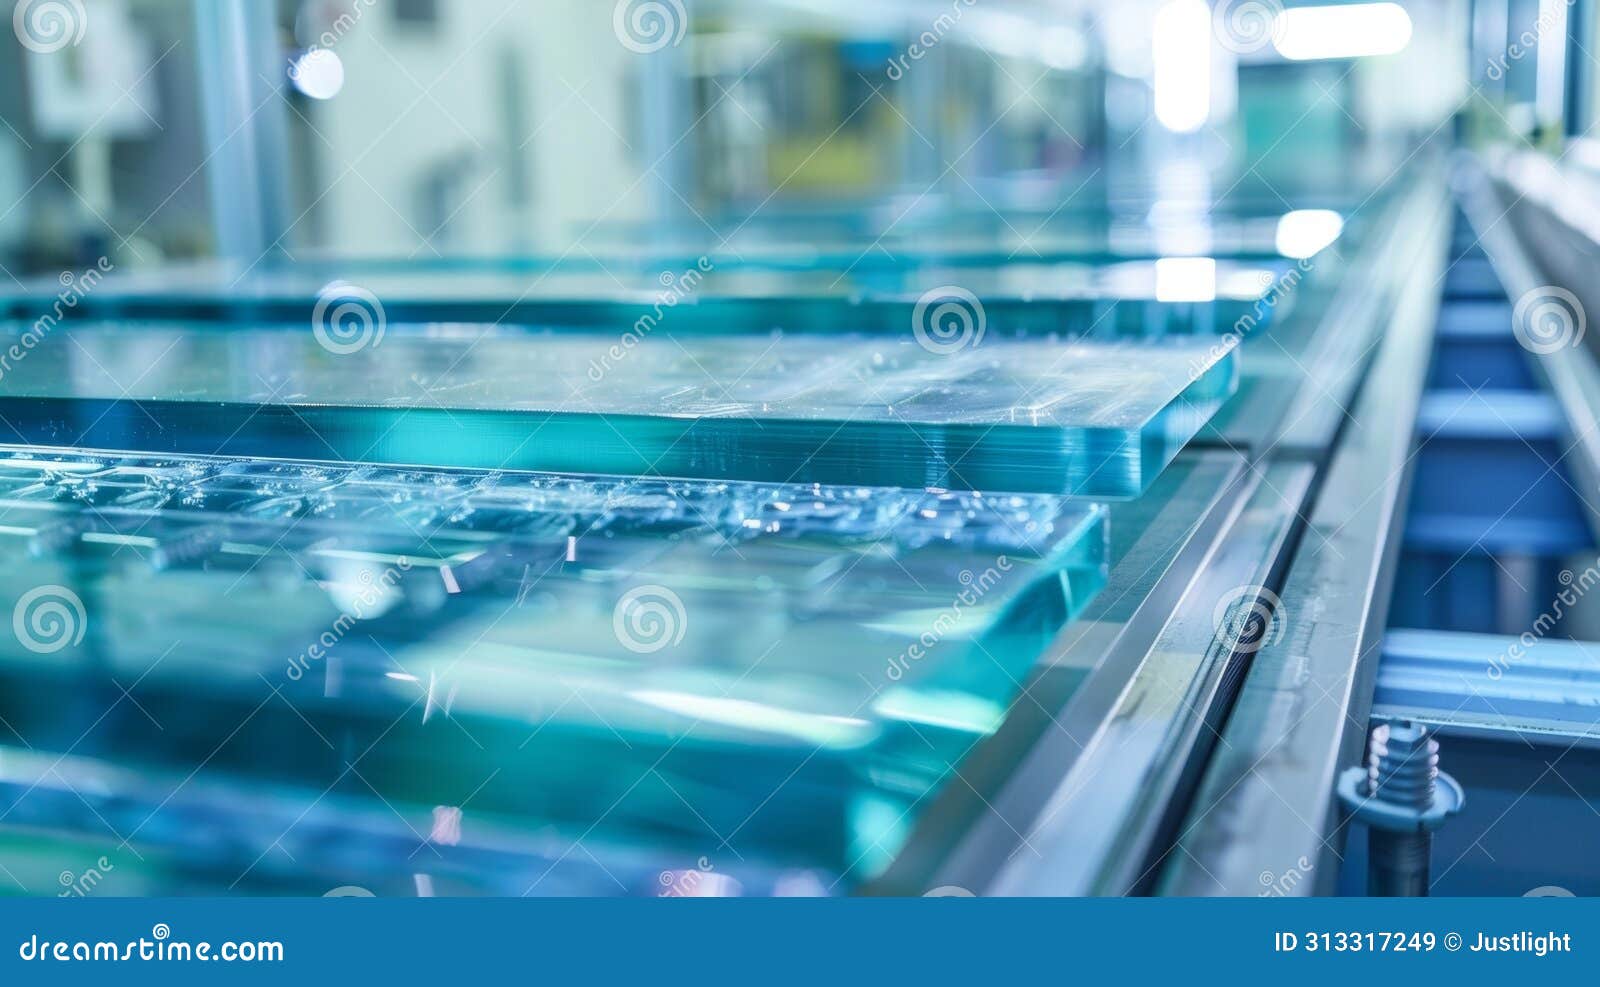 large sheets of glass being carefully and inspected for imperfections before being used to encase solar cells. .